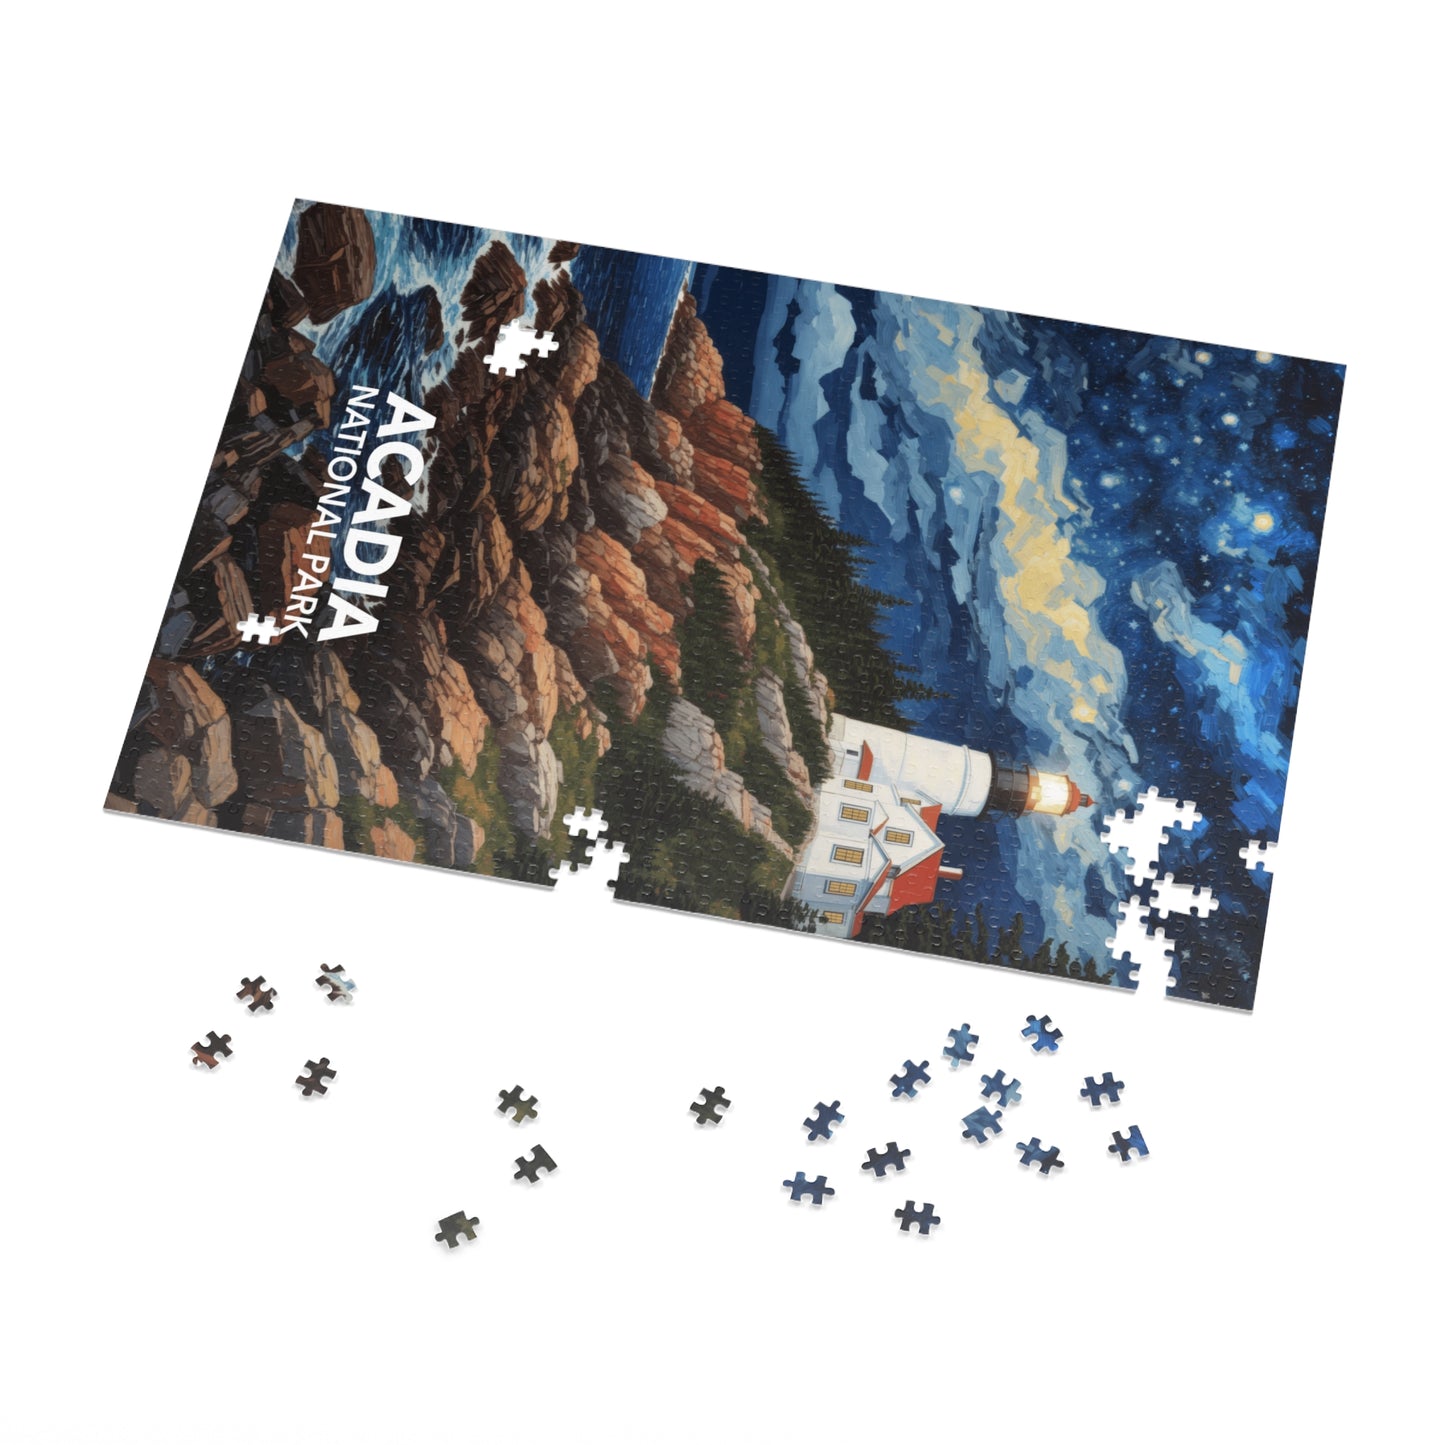 Acadia National Park Jigsaw Puzzle - The Starry Night